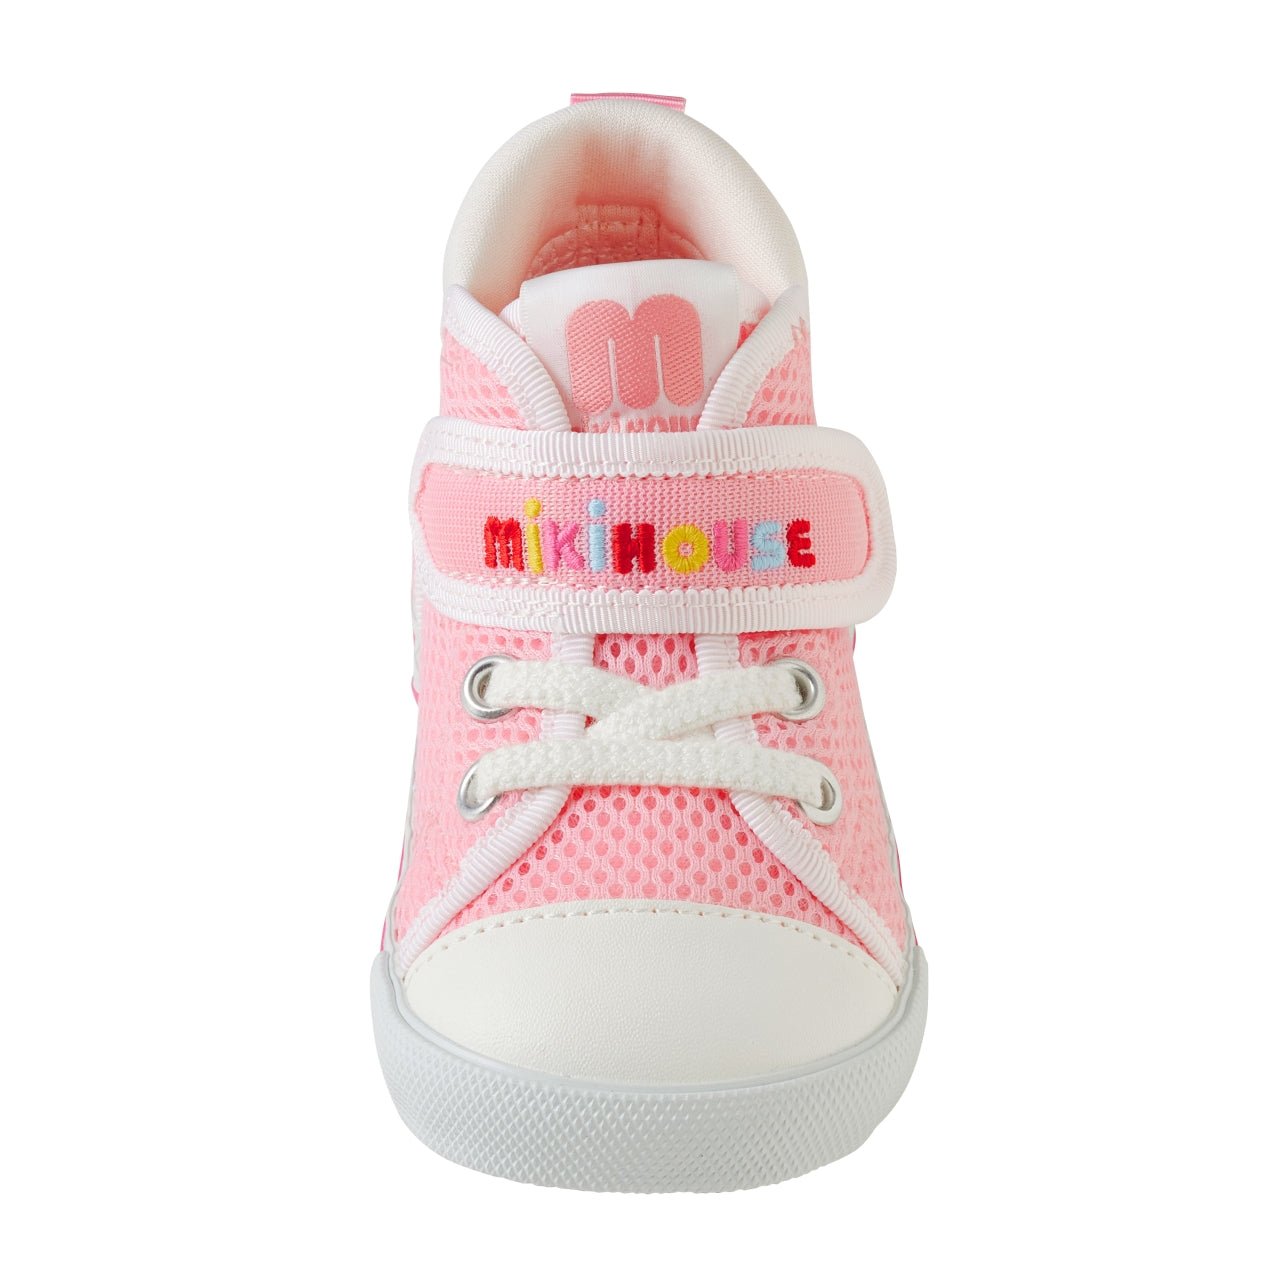 Double Russell Mesh Second Shoes - Strawberry Milk - MIKI HOUSE USA